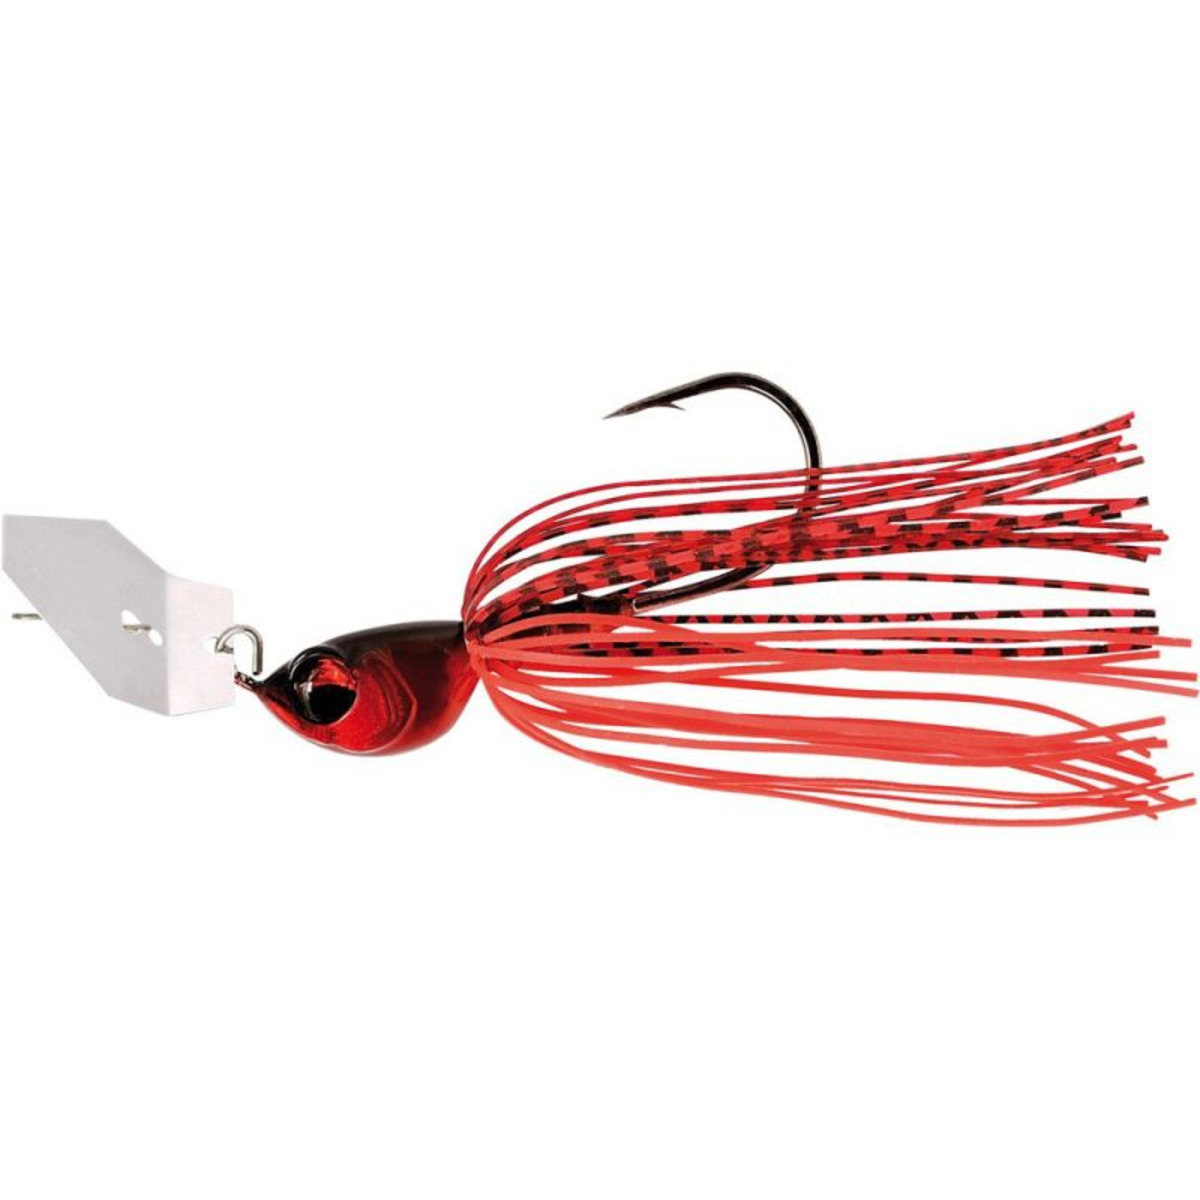 Rapture Chatterbait - 14.0 g - Texas Red